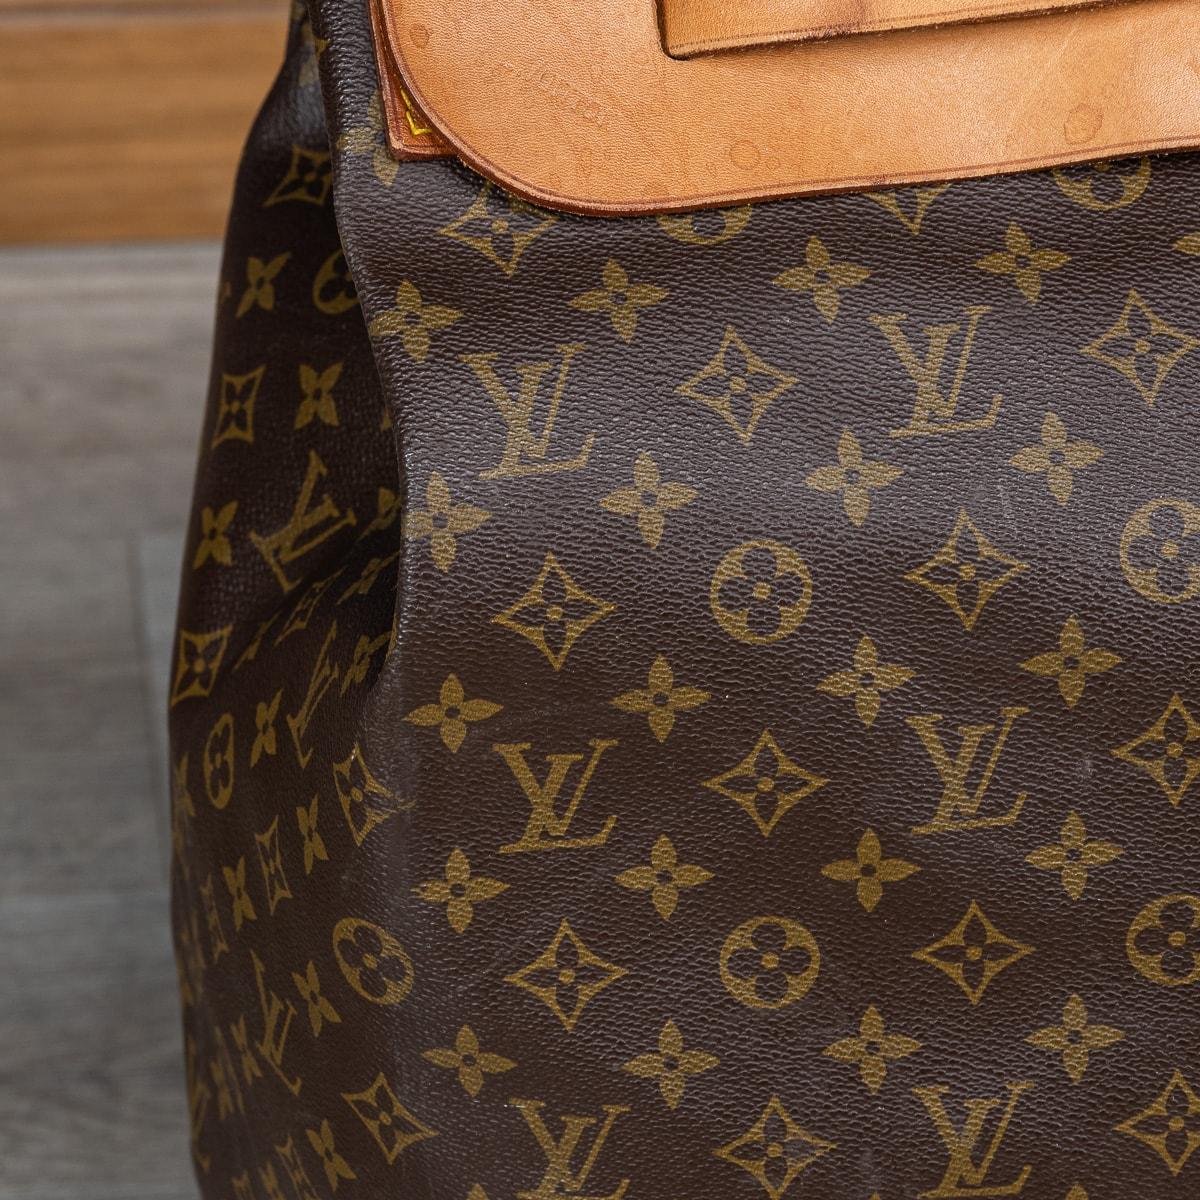 20th Century Louis Vuitton Steamer Bag In Monogram Canvas, Made In France For Sale 5